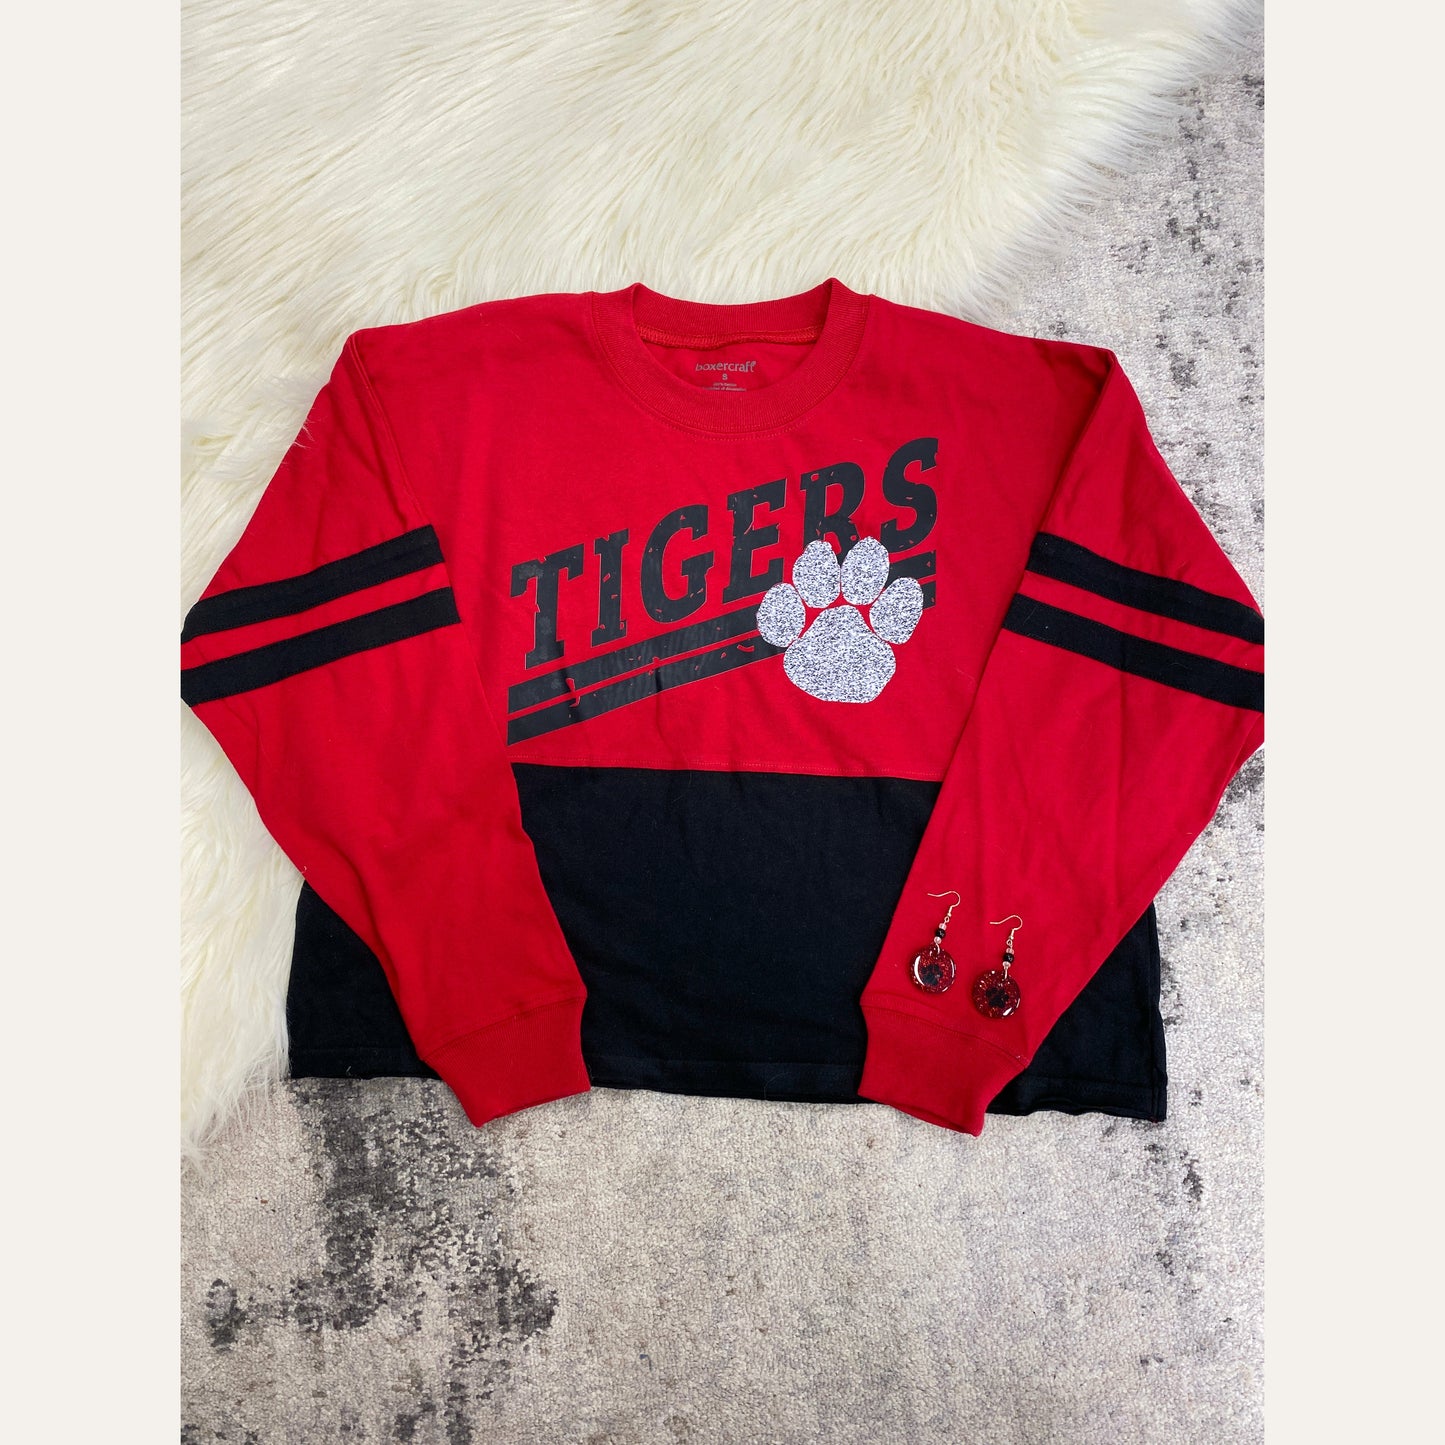 Tigers Long Sleeved Retro Crop ﻿This gorgeous crop is just what you need! The sleeves and top of the crop are red and the bottom half is black. It comes complete with two black stripes on each arm and a tigers logo with a siler sparkly tiger paw. A definite must-have for this football season!  %100 Cotton Machine Washable  Tea Shirt Shoppe 417-262-8828